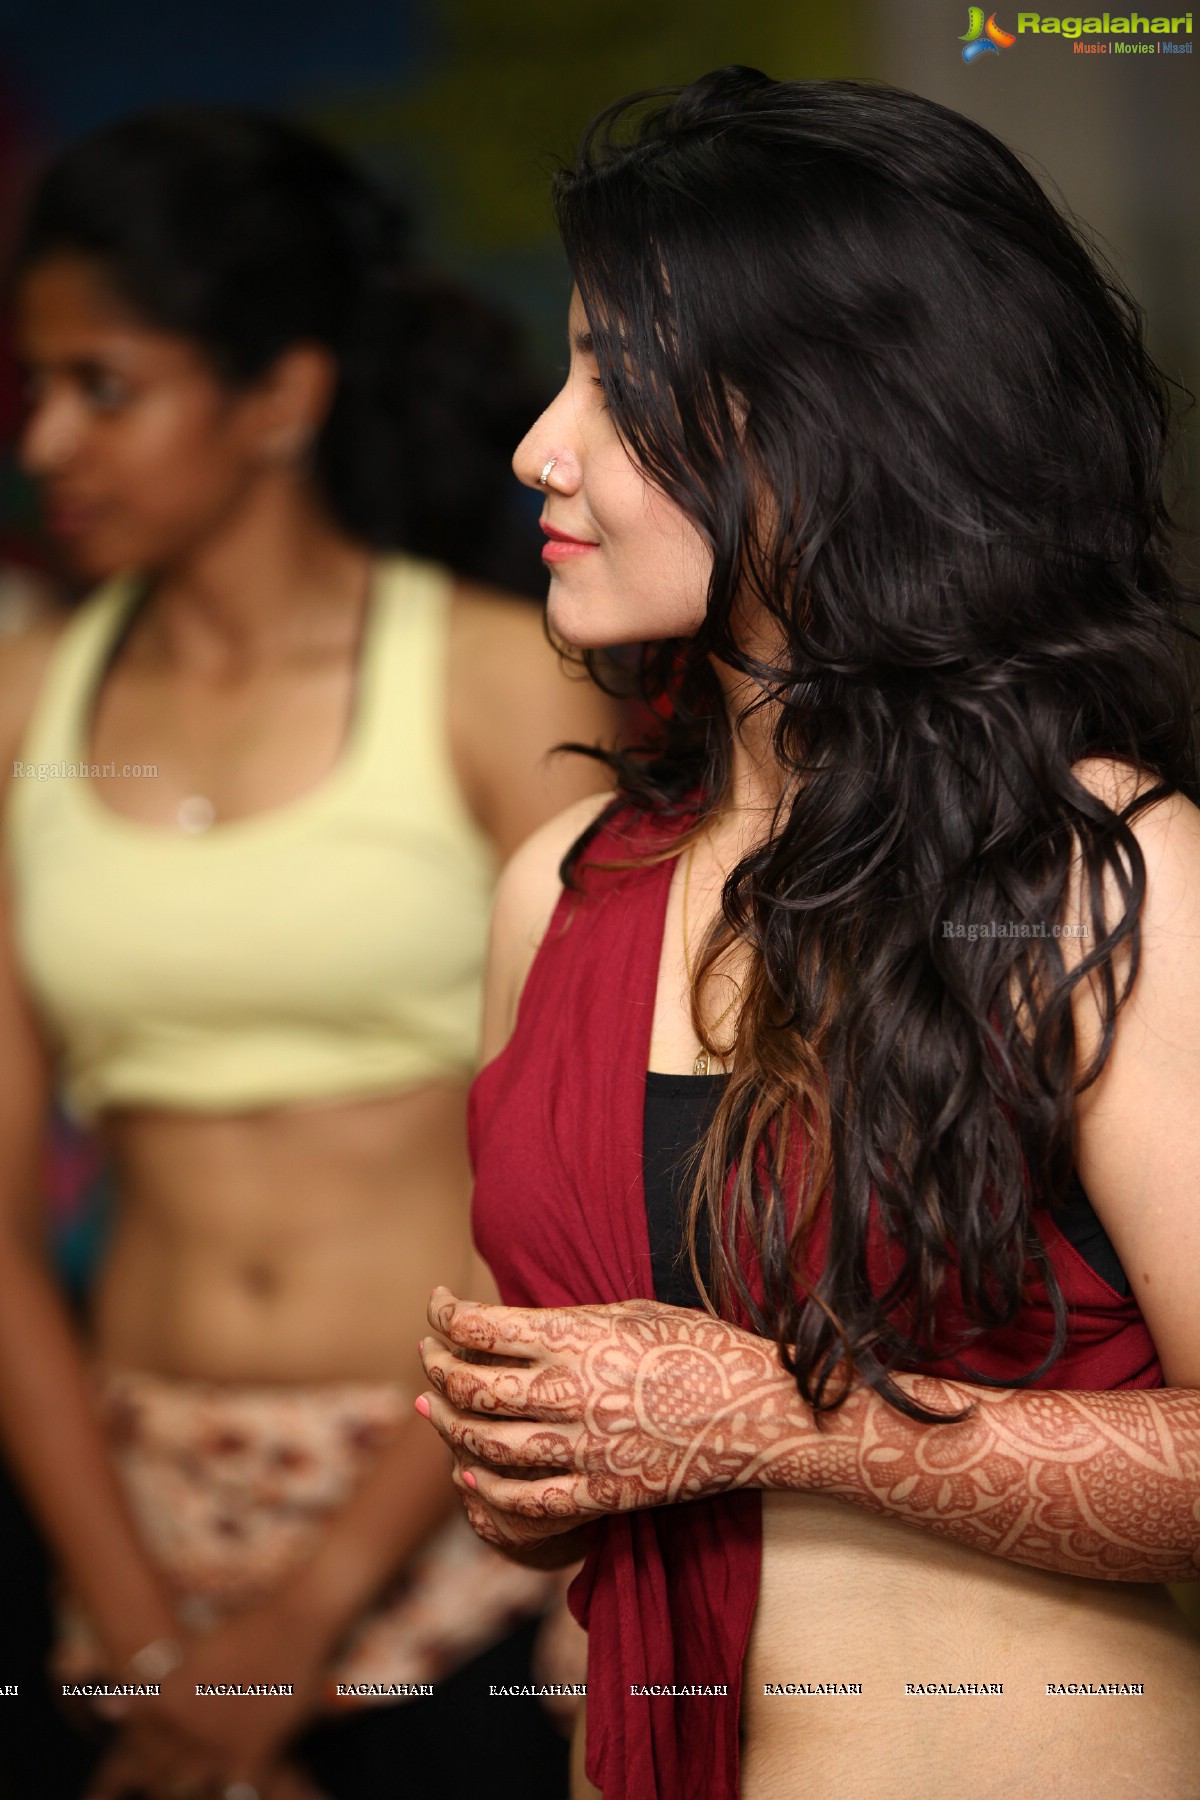 Bellywood Technique and Choreography Camp by Meher Mallik in Hyderabad